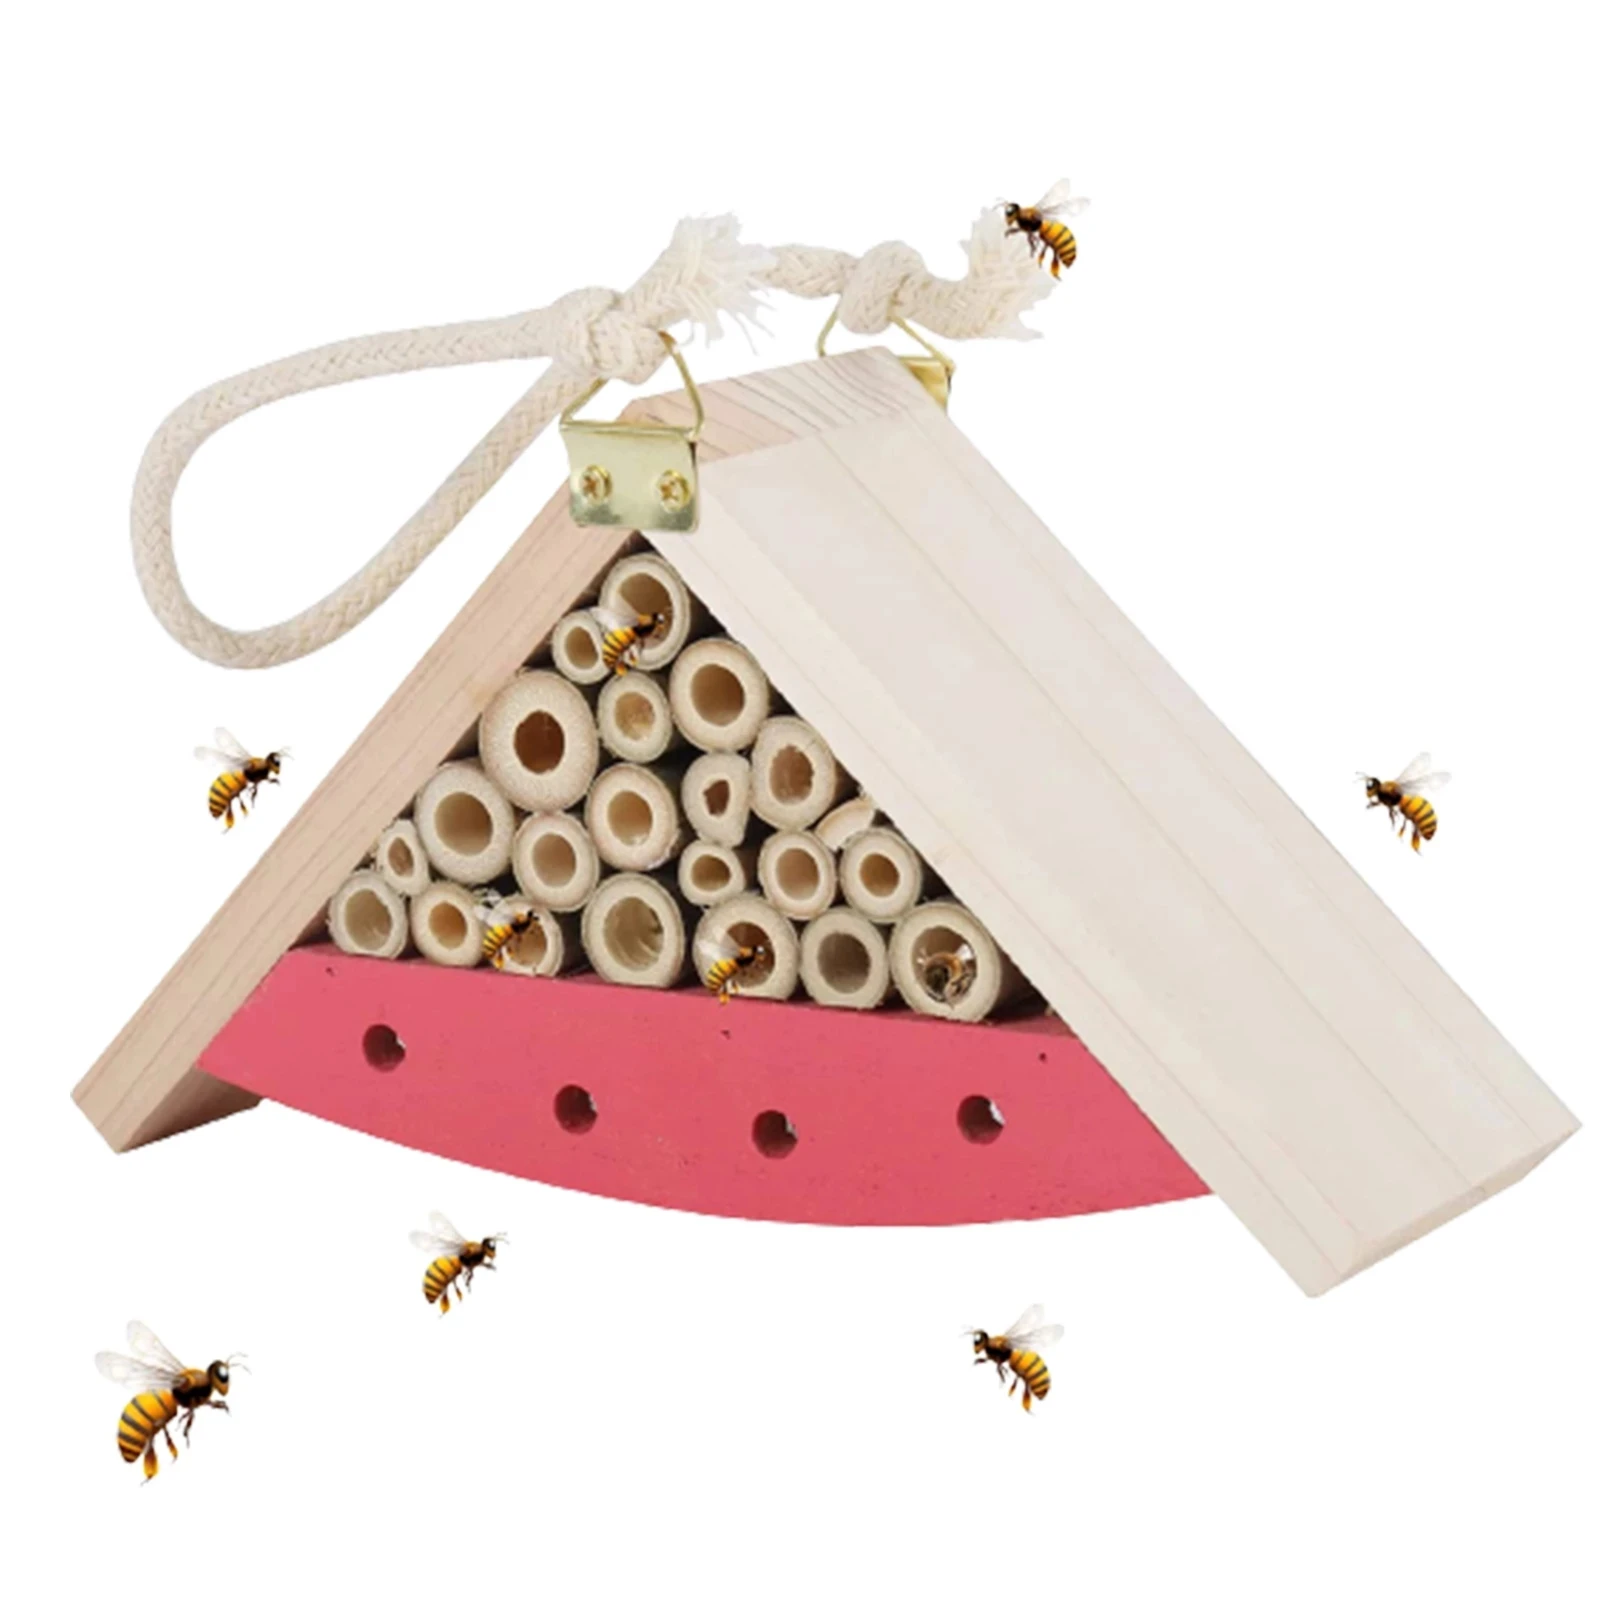 Wooden Insect House Bee&Butterfly House Bug Hotel For Garden Hanging Bug Hotel For Mason Bees Butterfly Ladybirds Lacewings Pink